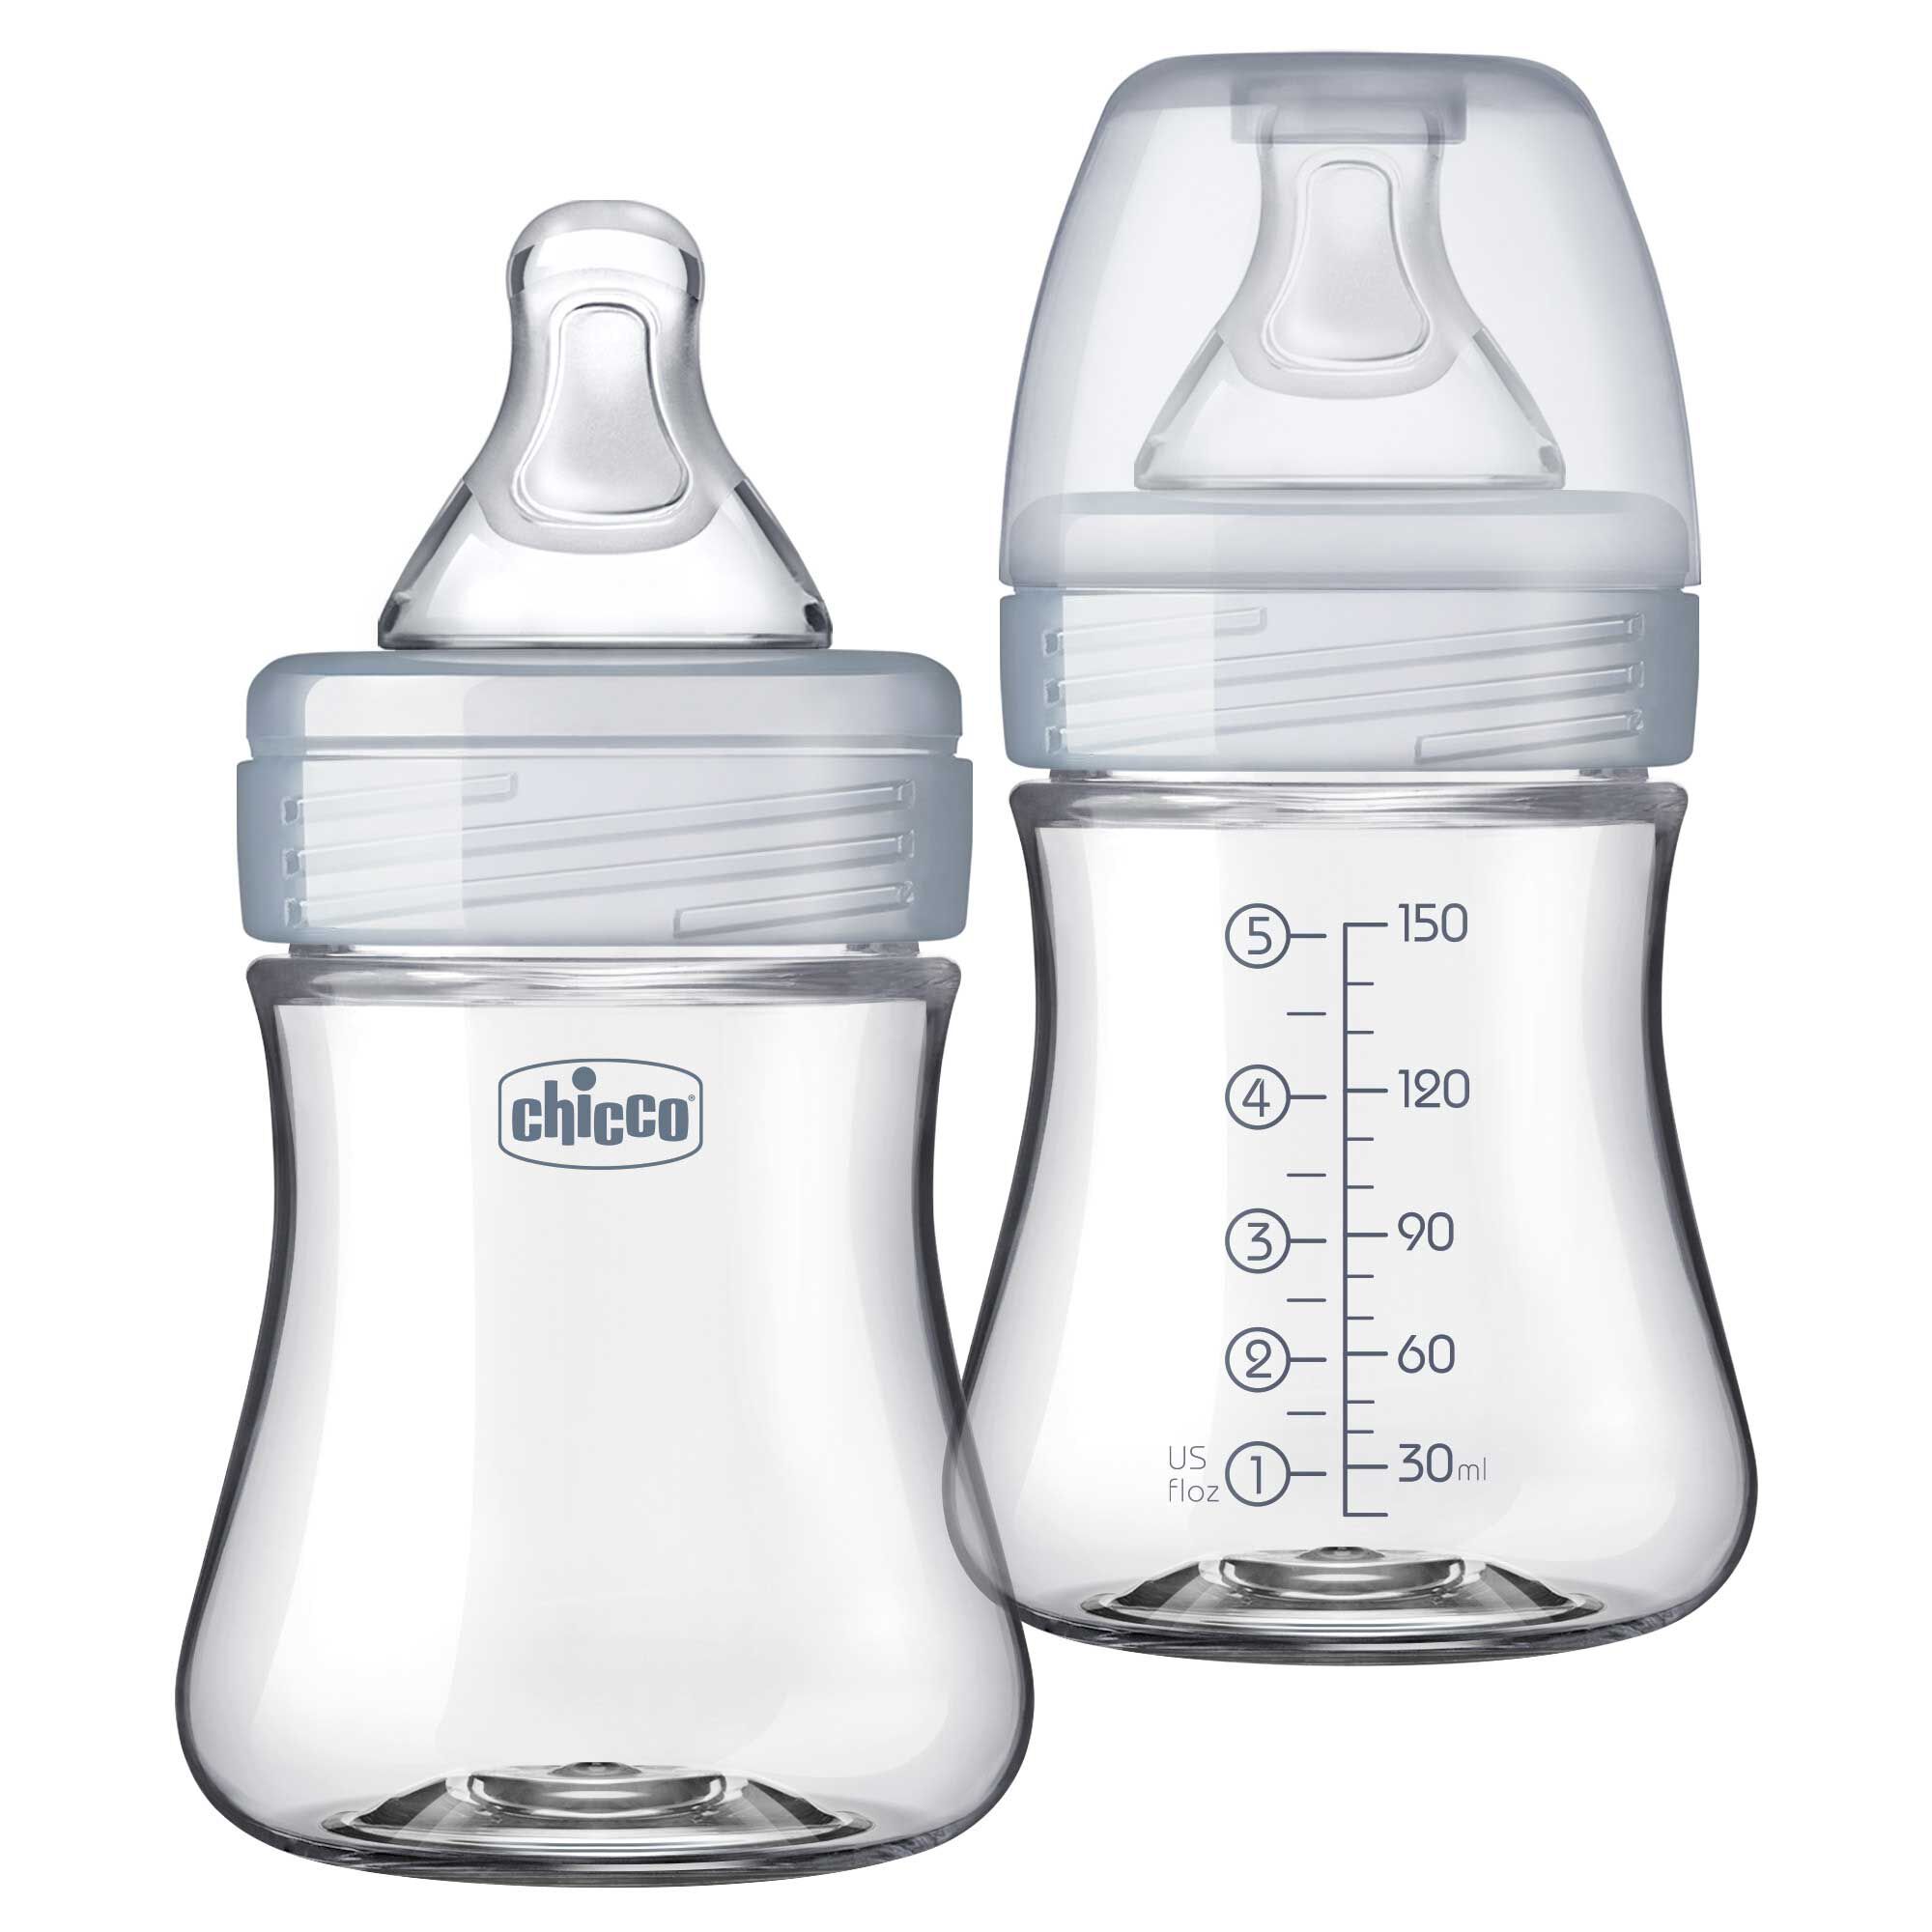 MAM Bottle Nipples Level 1 Slow Flow Nipple 0 Months 2count Baby